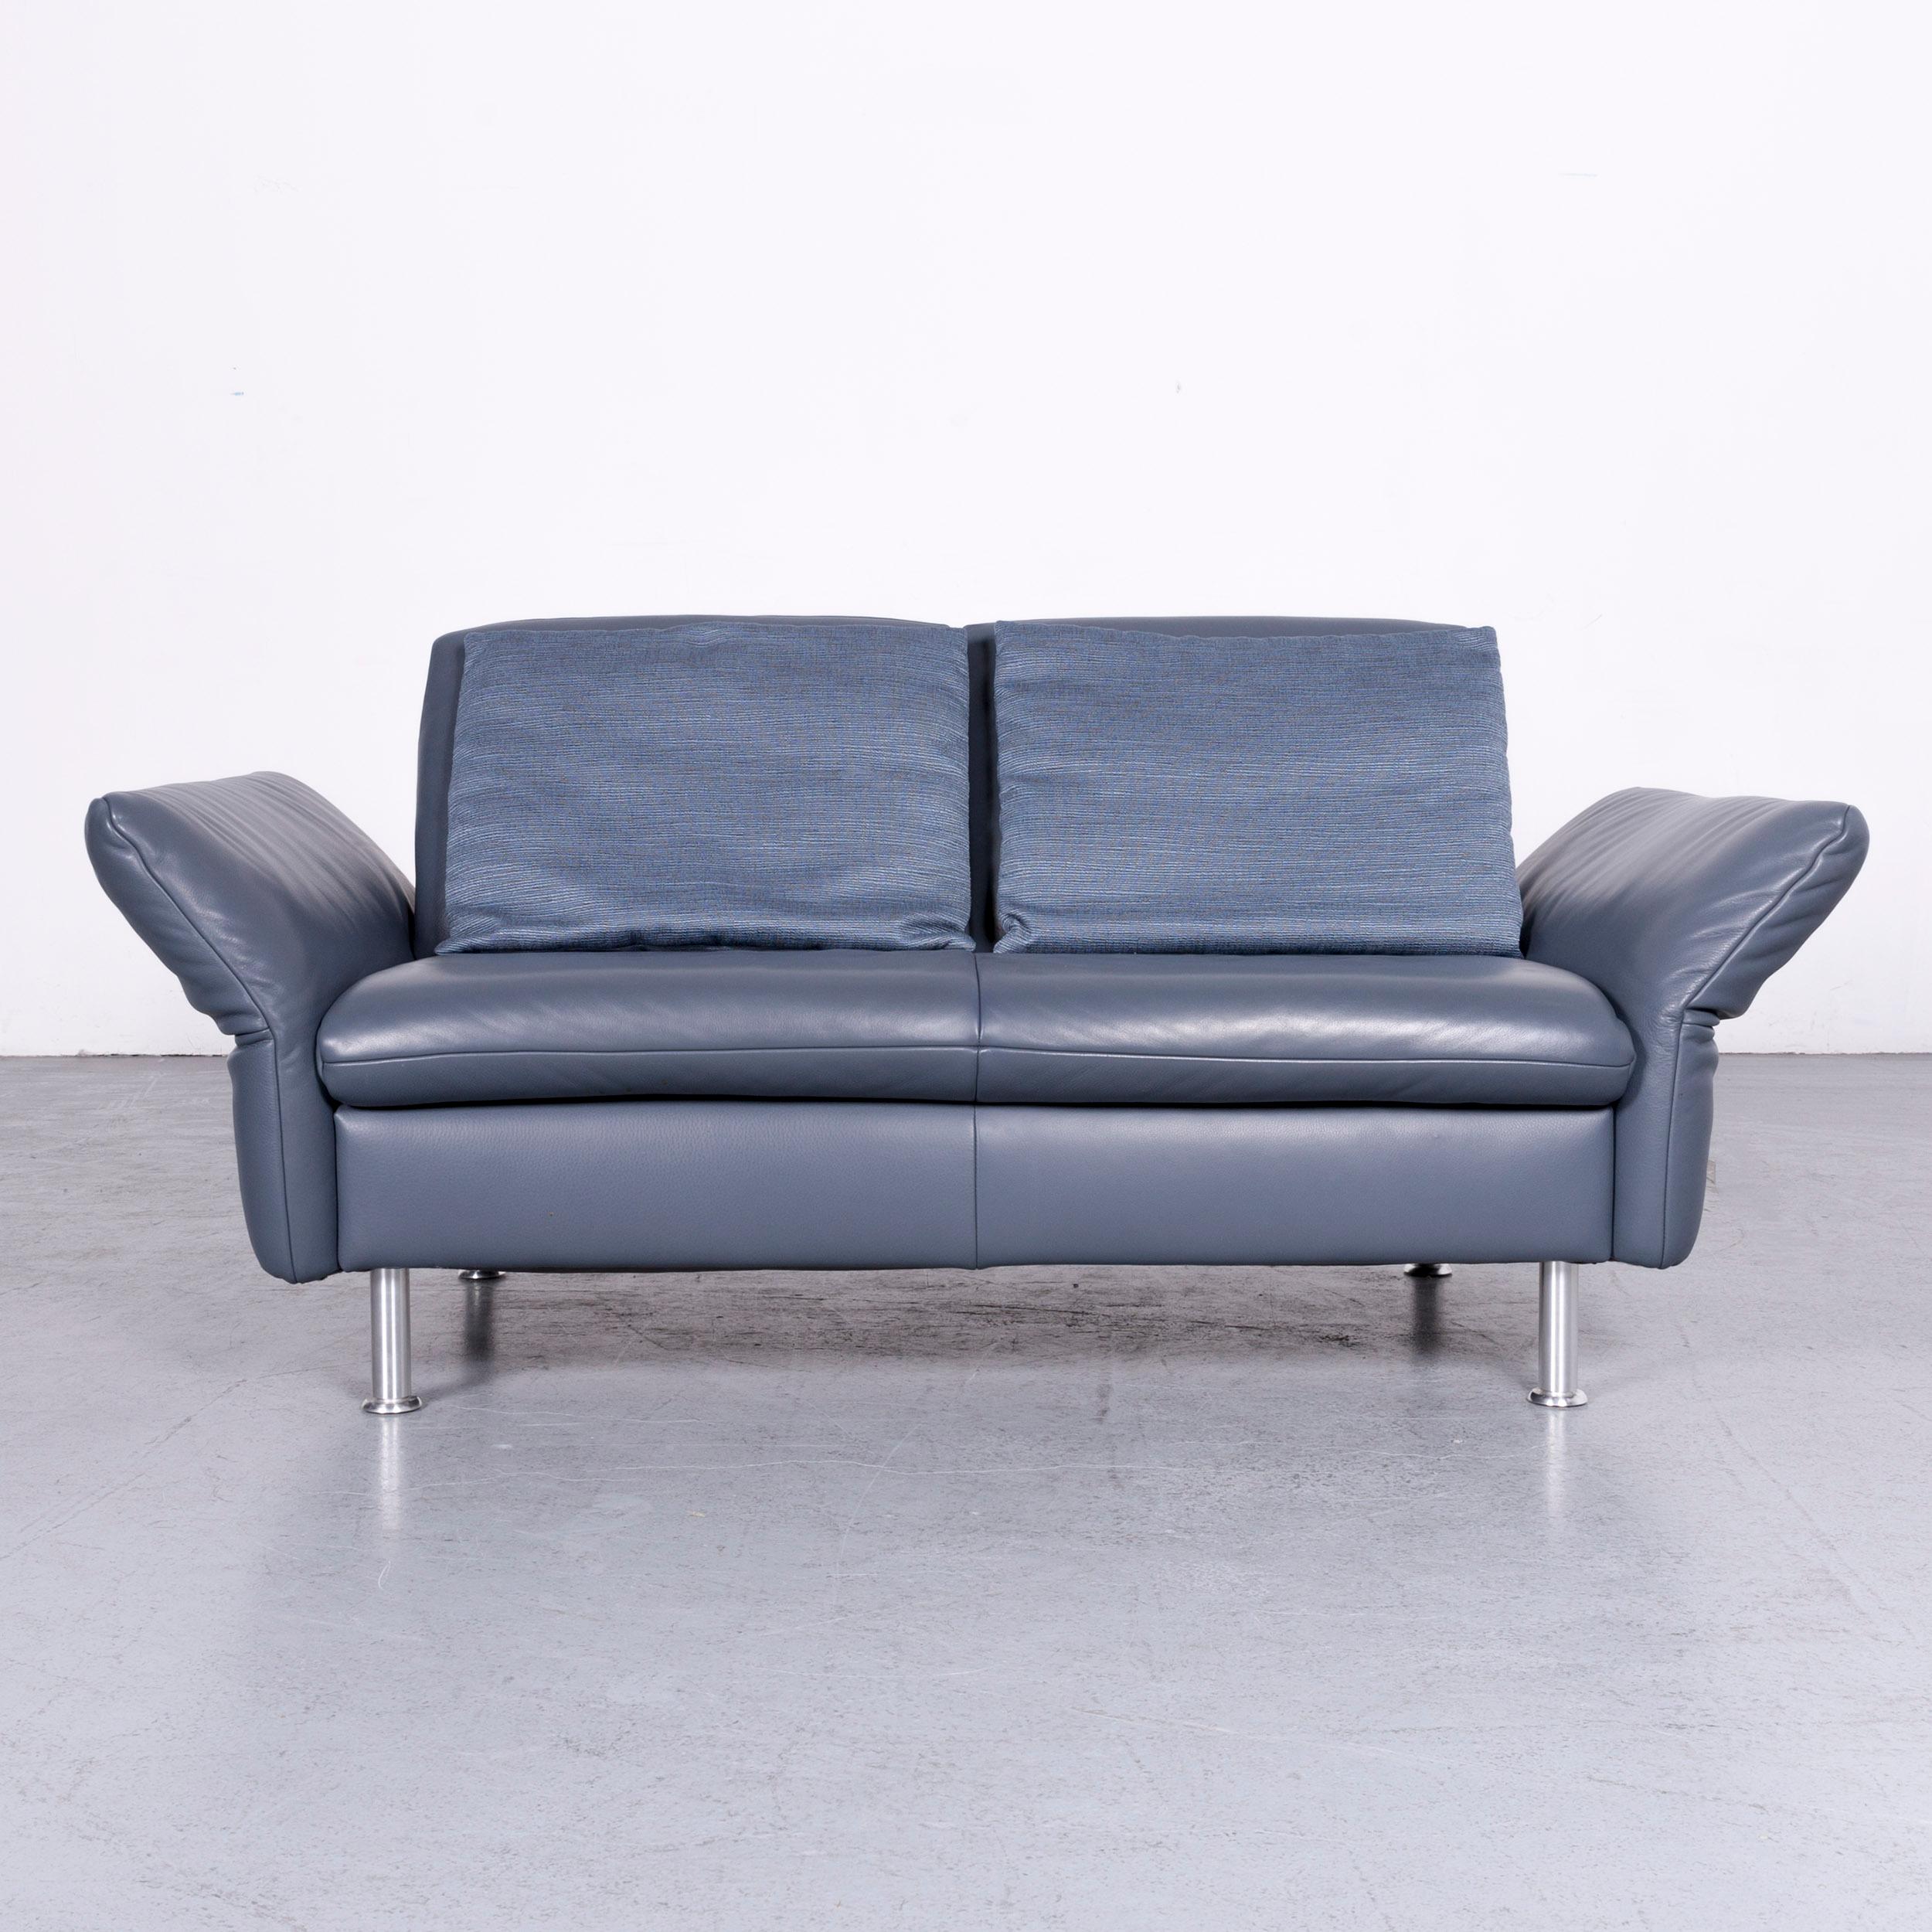 German Koinor Designer Two-Seat Sofa Blue Leather Couch